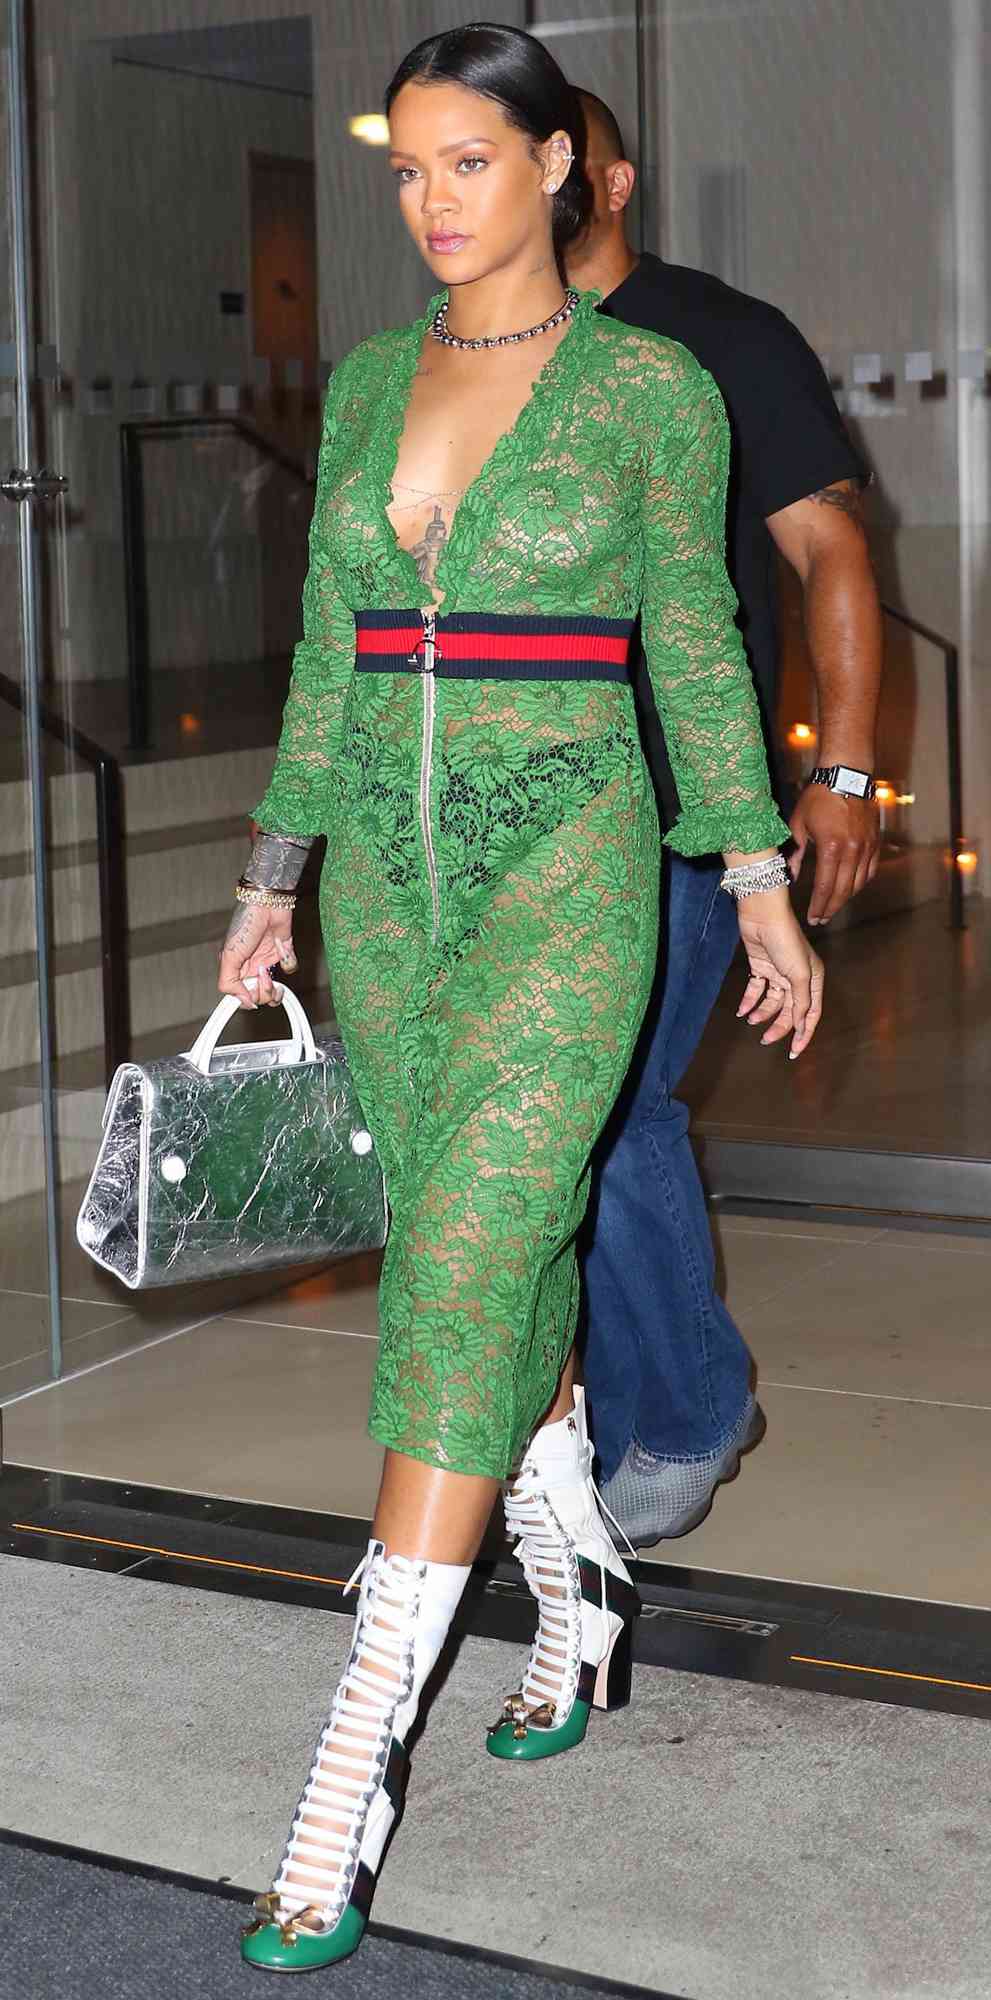 Rihanna enjoys a casual night out at The Edition Hotel in New York City. The Barbadian pop star wore a green Gucci cotton-blend lace dress with a ribbed-knit waistband, ruffled trims and polished two-way zip. She paired her dress with Gucci Finnlay leathe